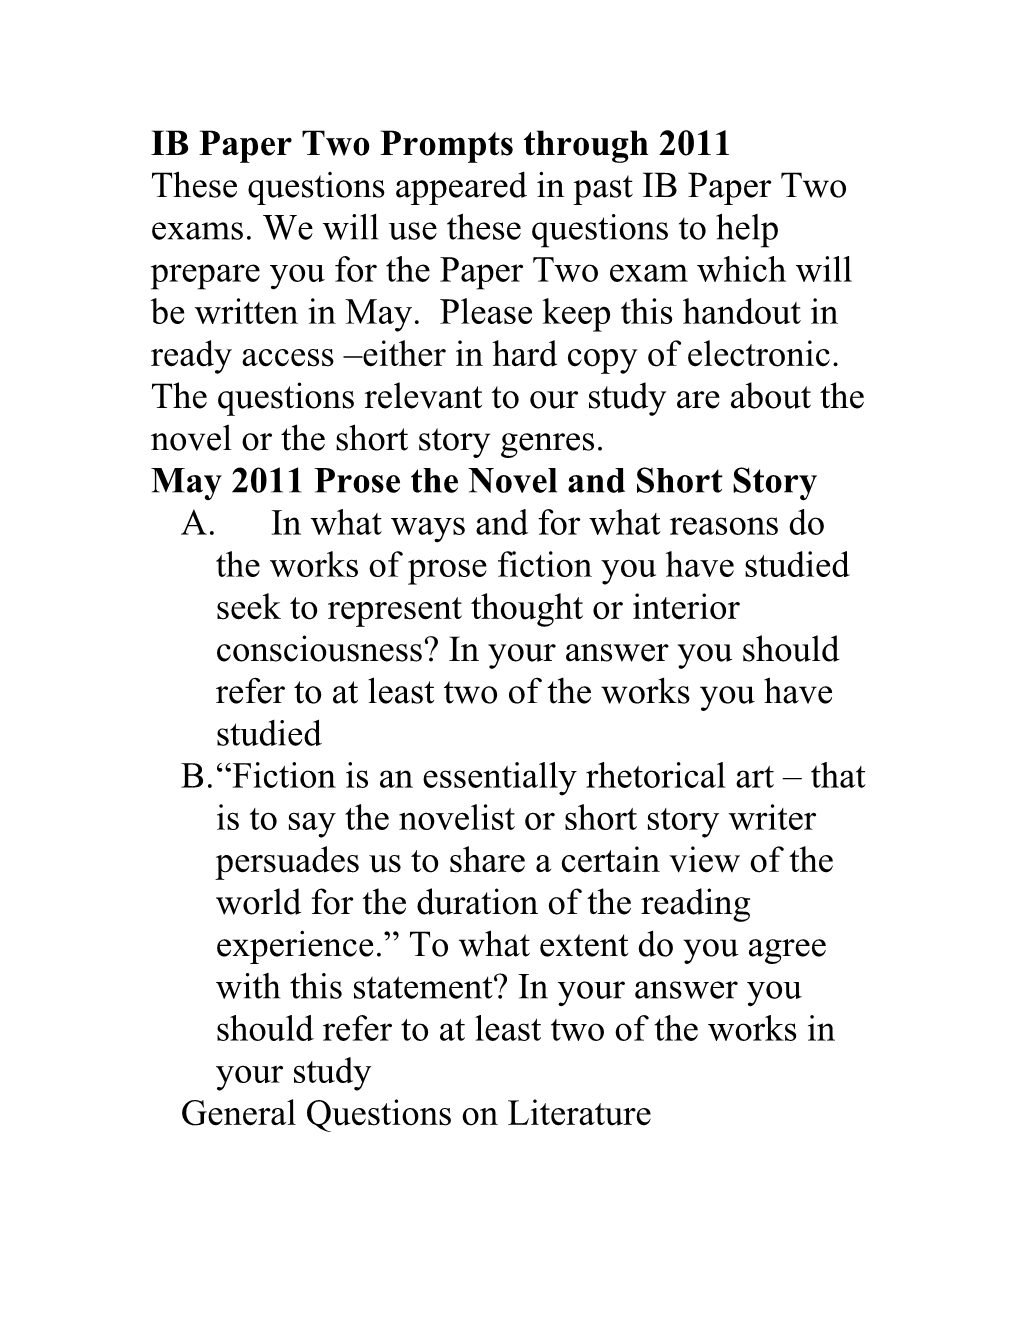 IB Literary Essay Prompts for Paper Two